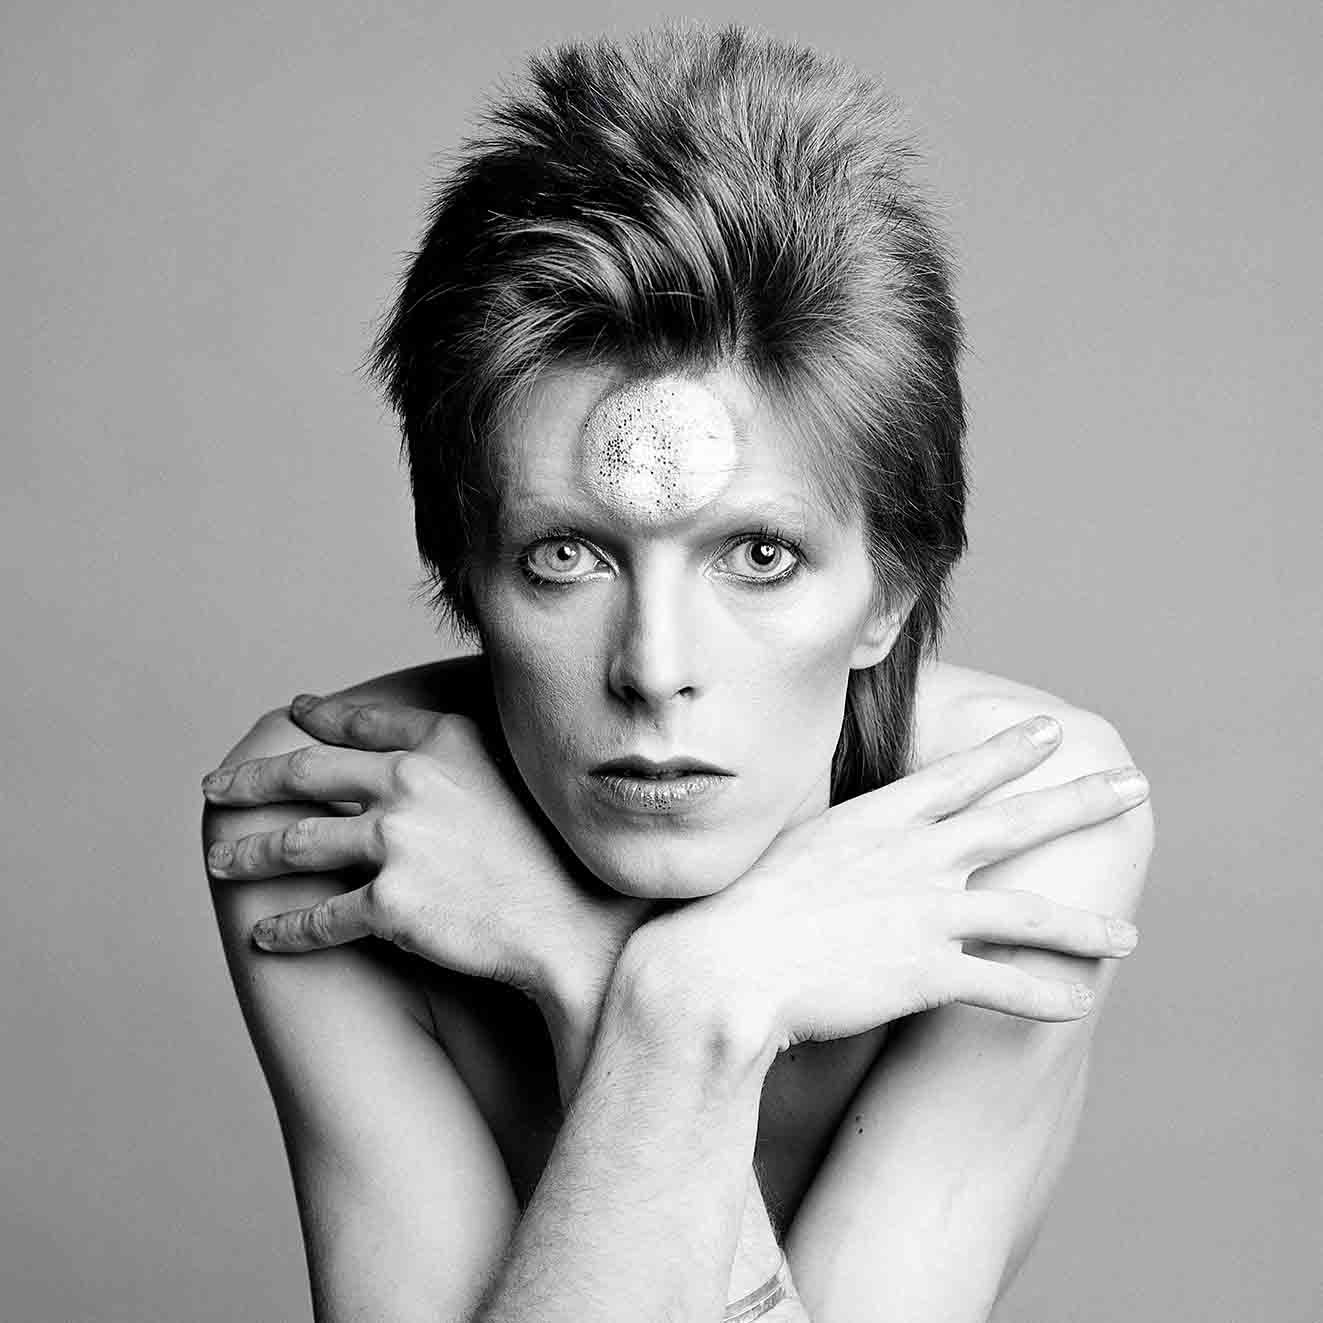 The making of an icon: David Bowie's life in photos | The Independent